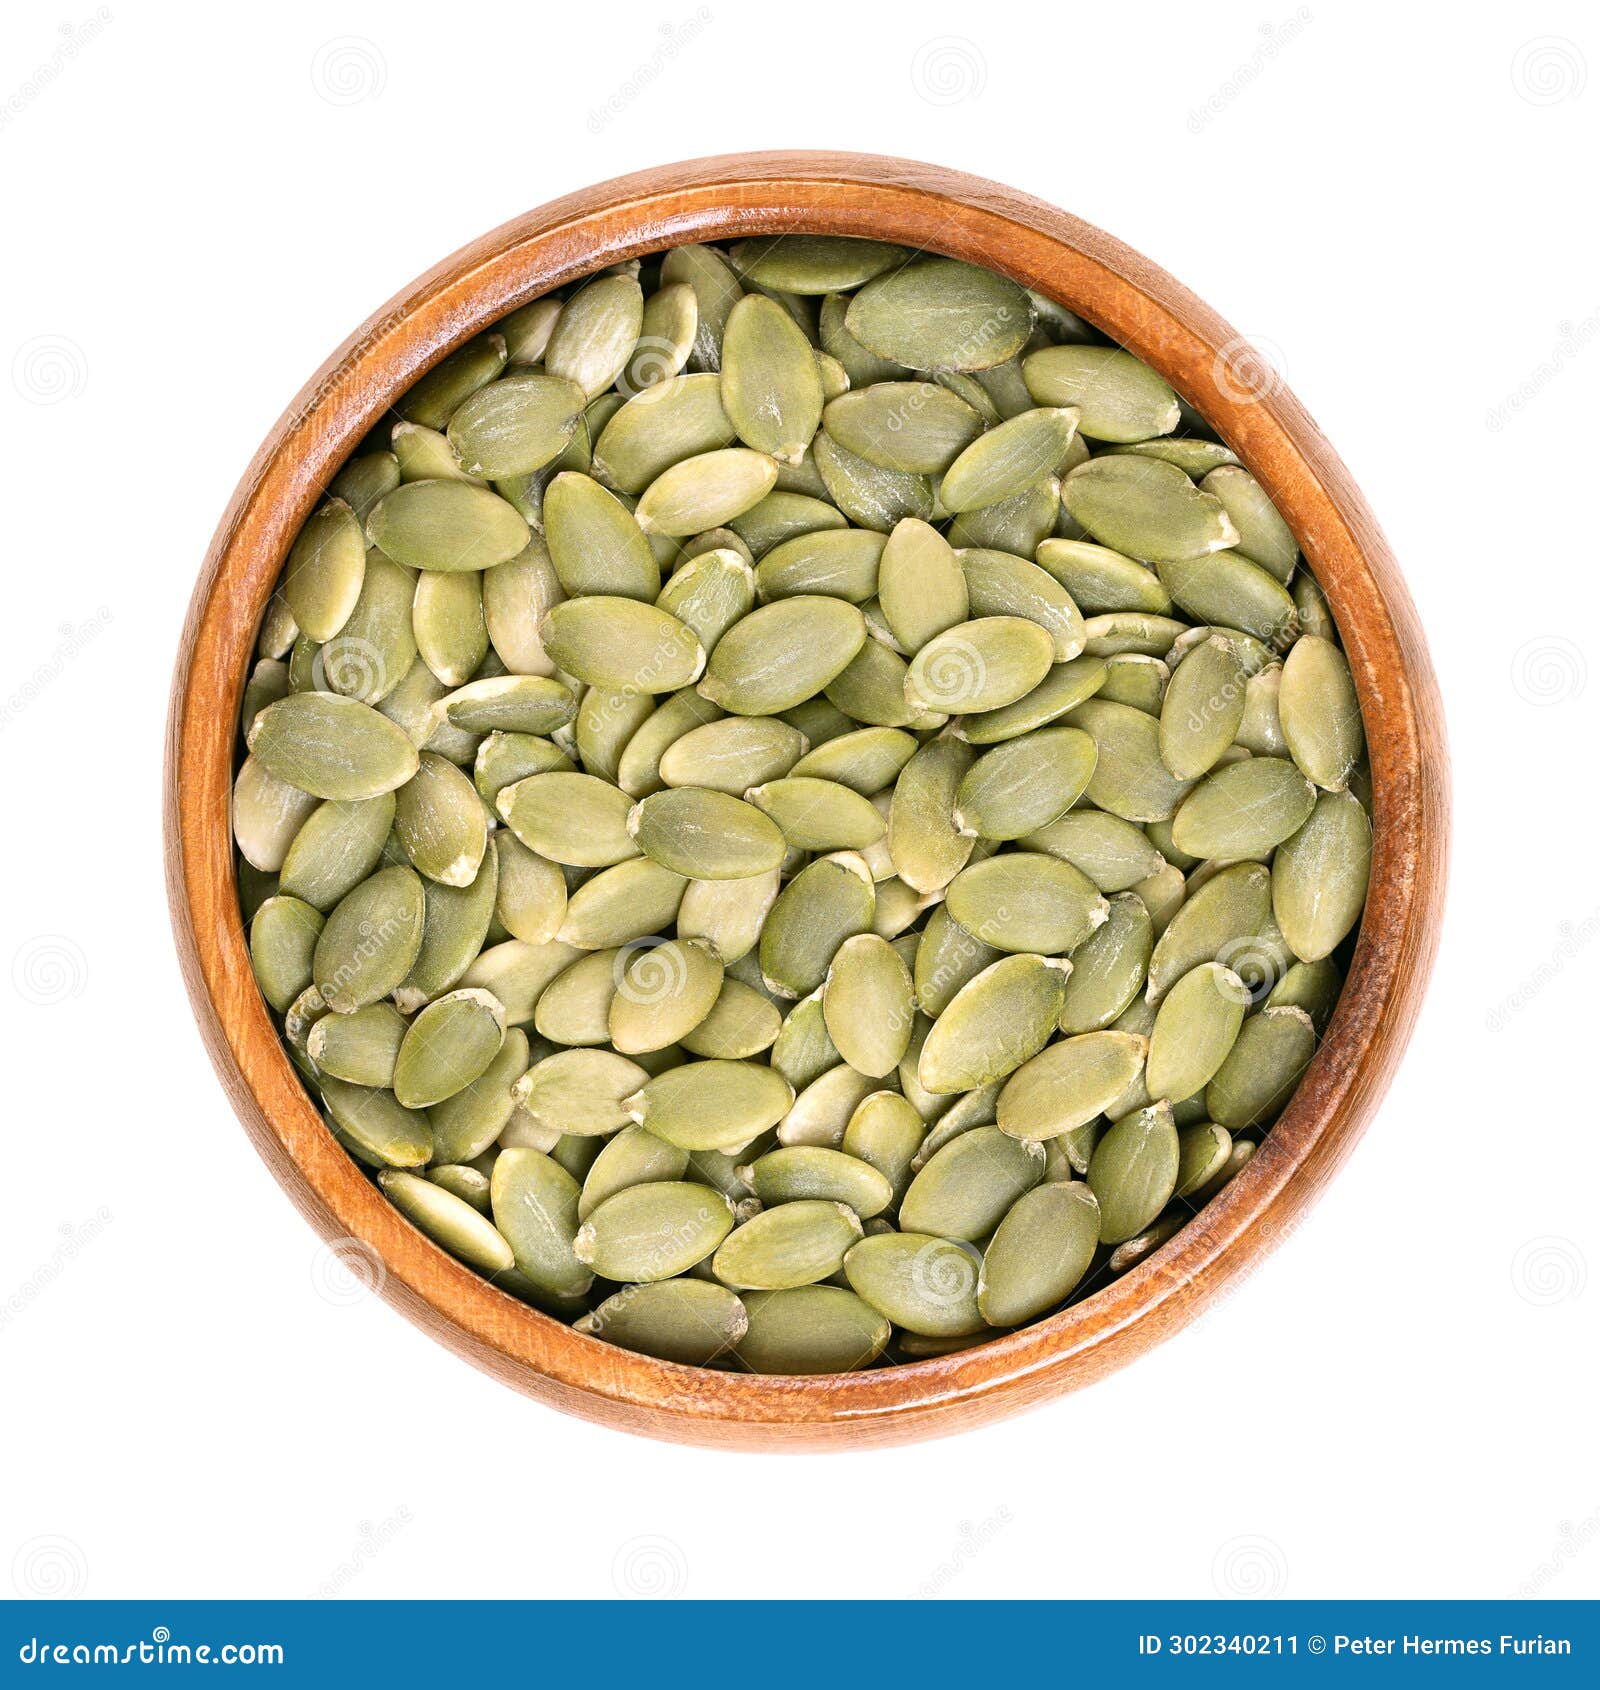 pepitas, hulled pumpkin seeds after shelling, in a wooden bowl